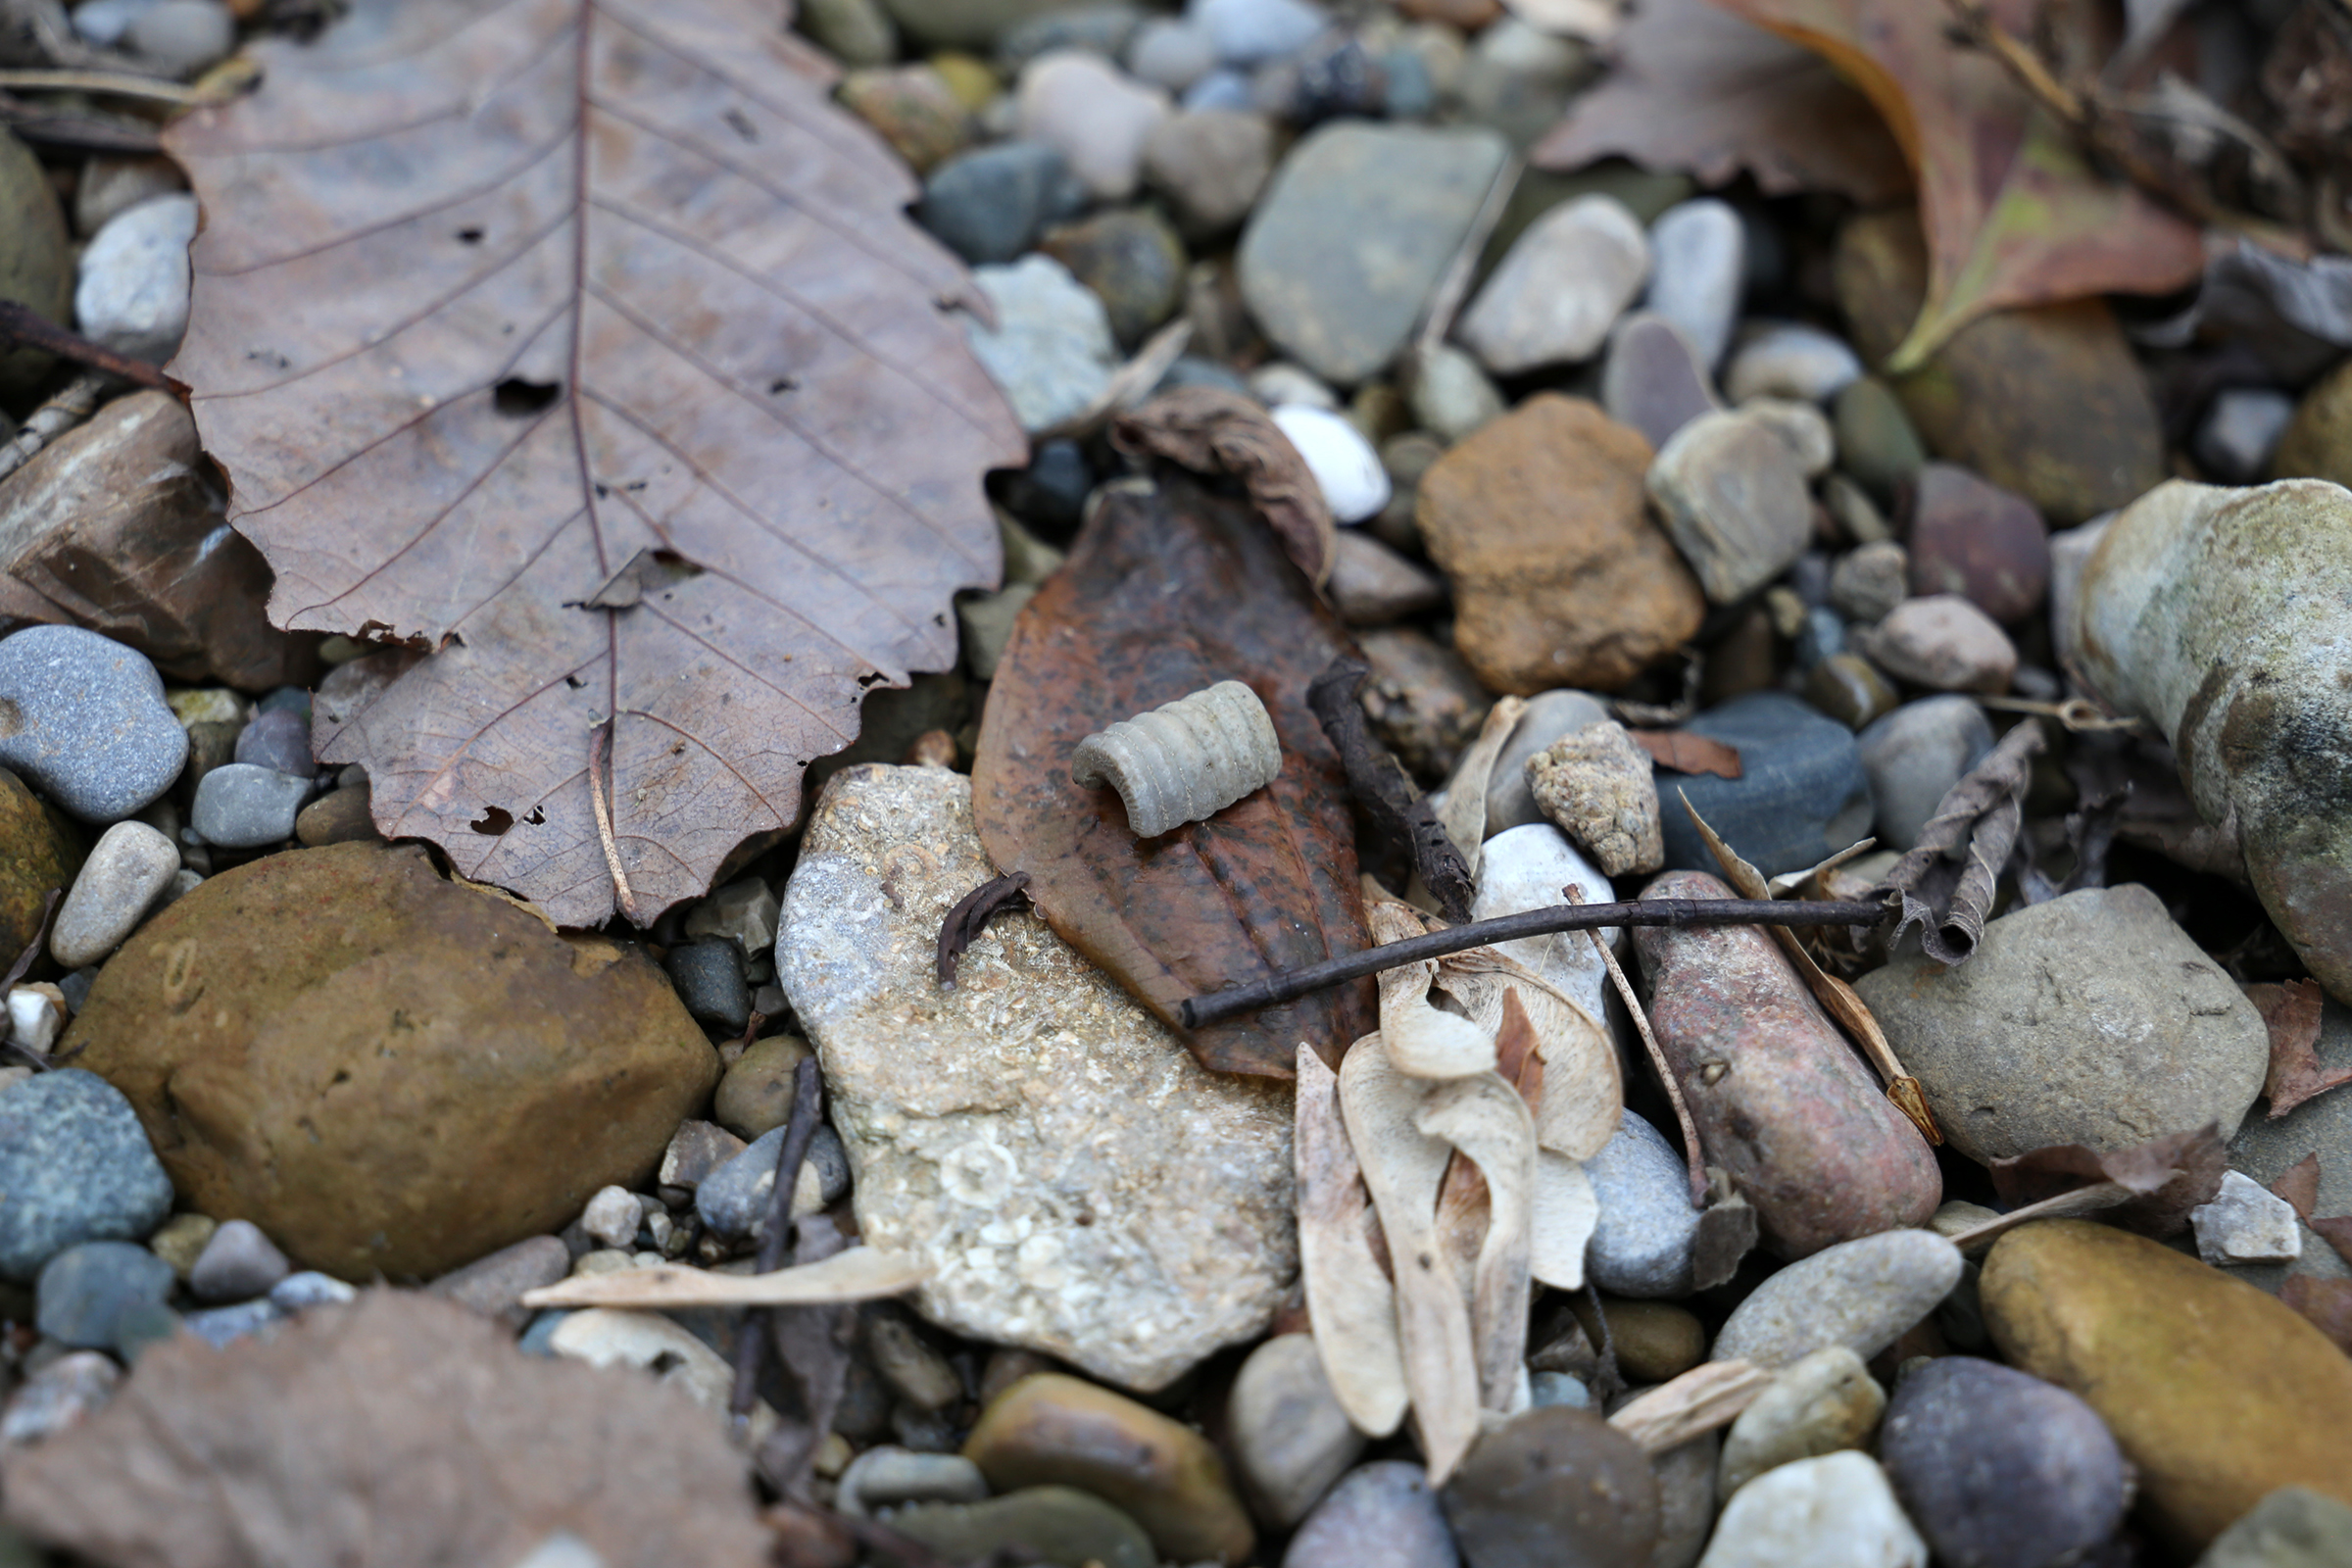 Small crinoid fossil sitting on a dried autumn leaf, amid sticks, stones, and other leaves on the river shore. 